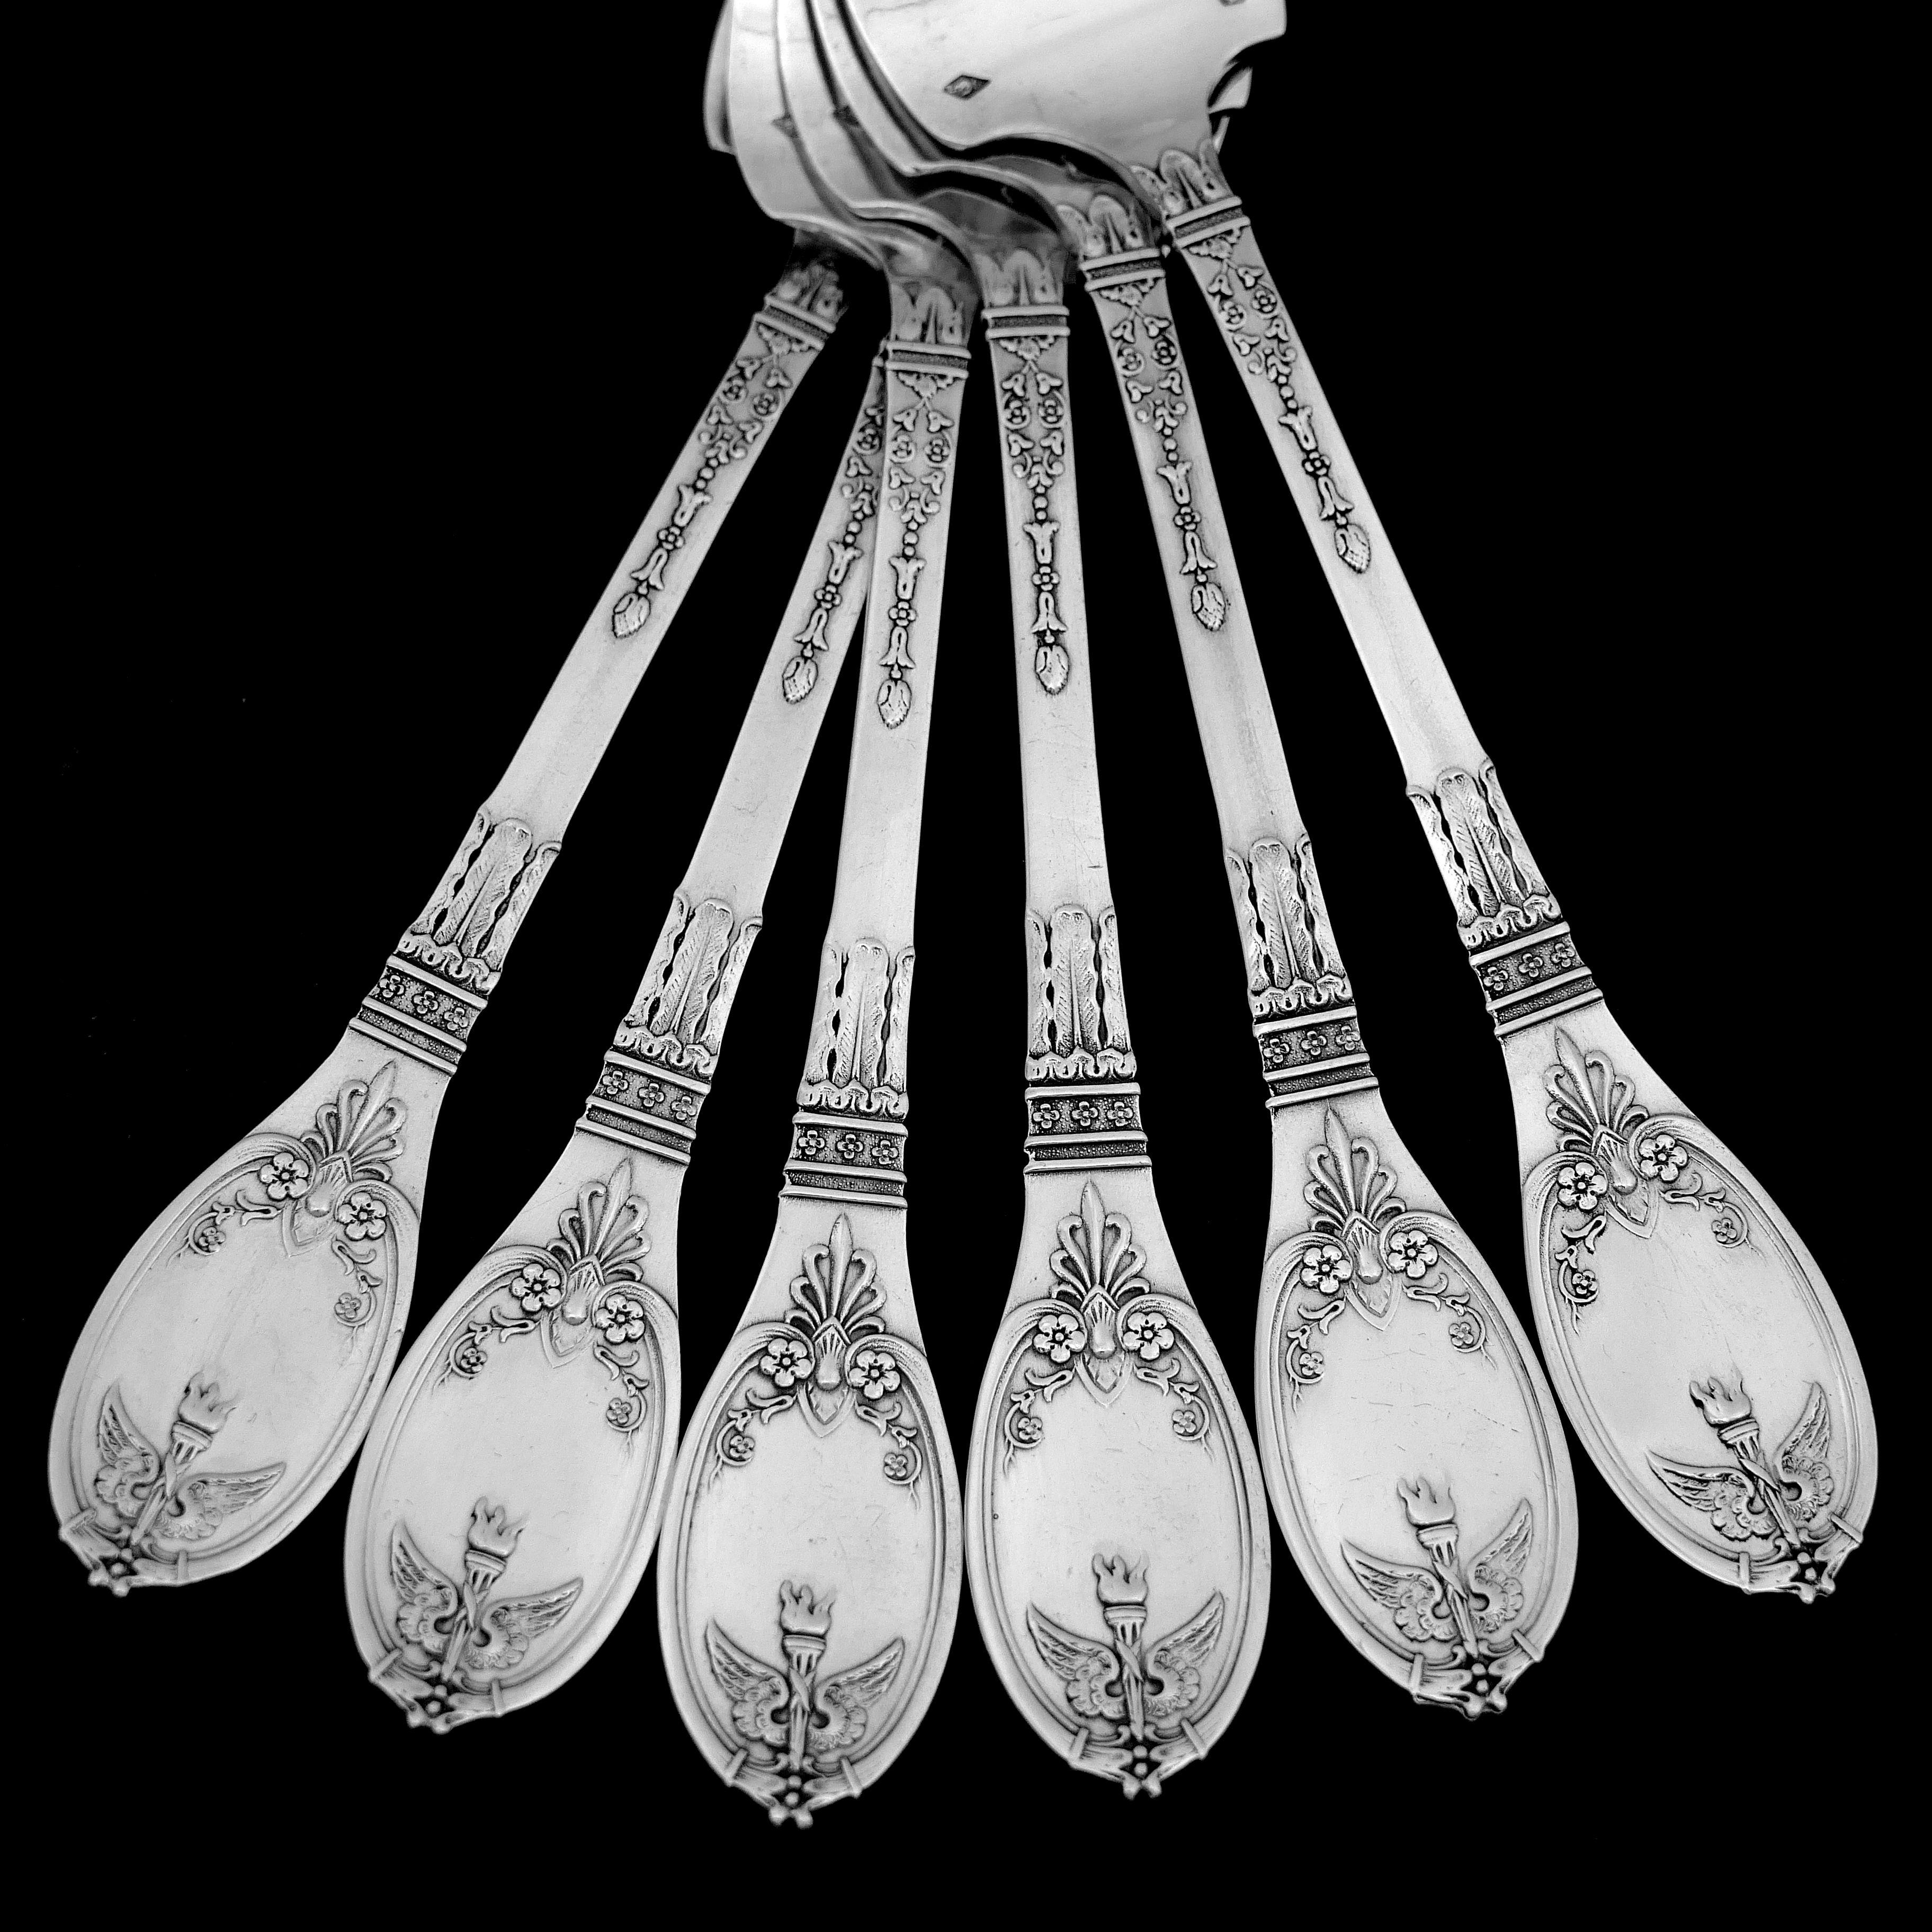 Lapparra Fabulous French Sterling Silver Oyster Forks Set 6 Pc, Empire Torch For Sale 3